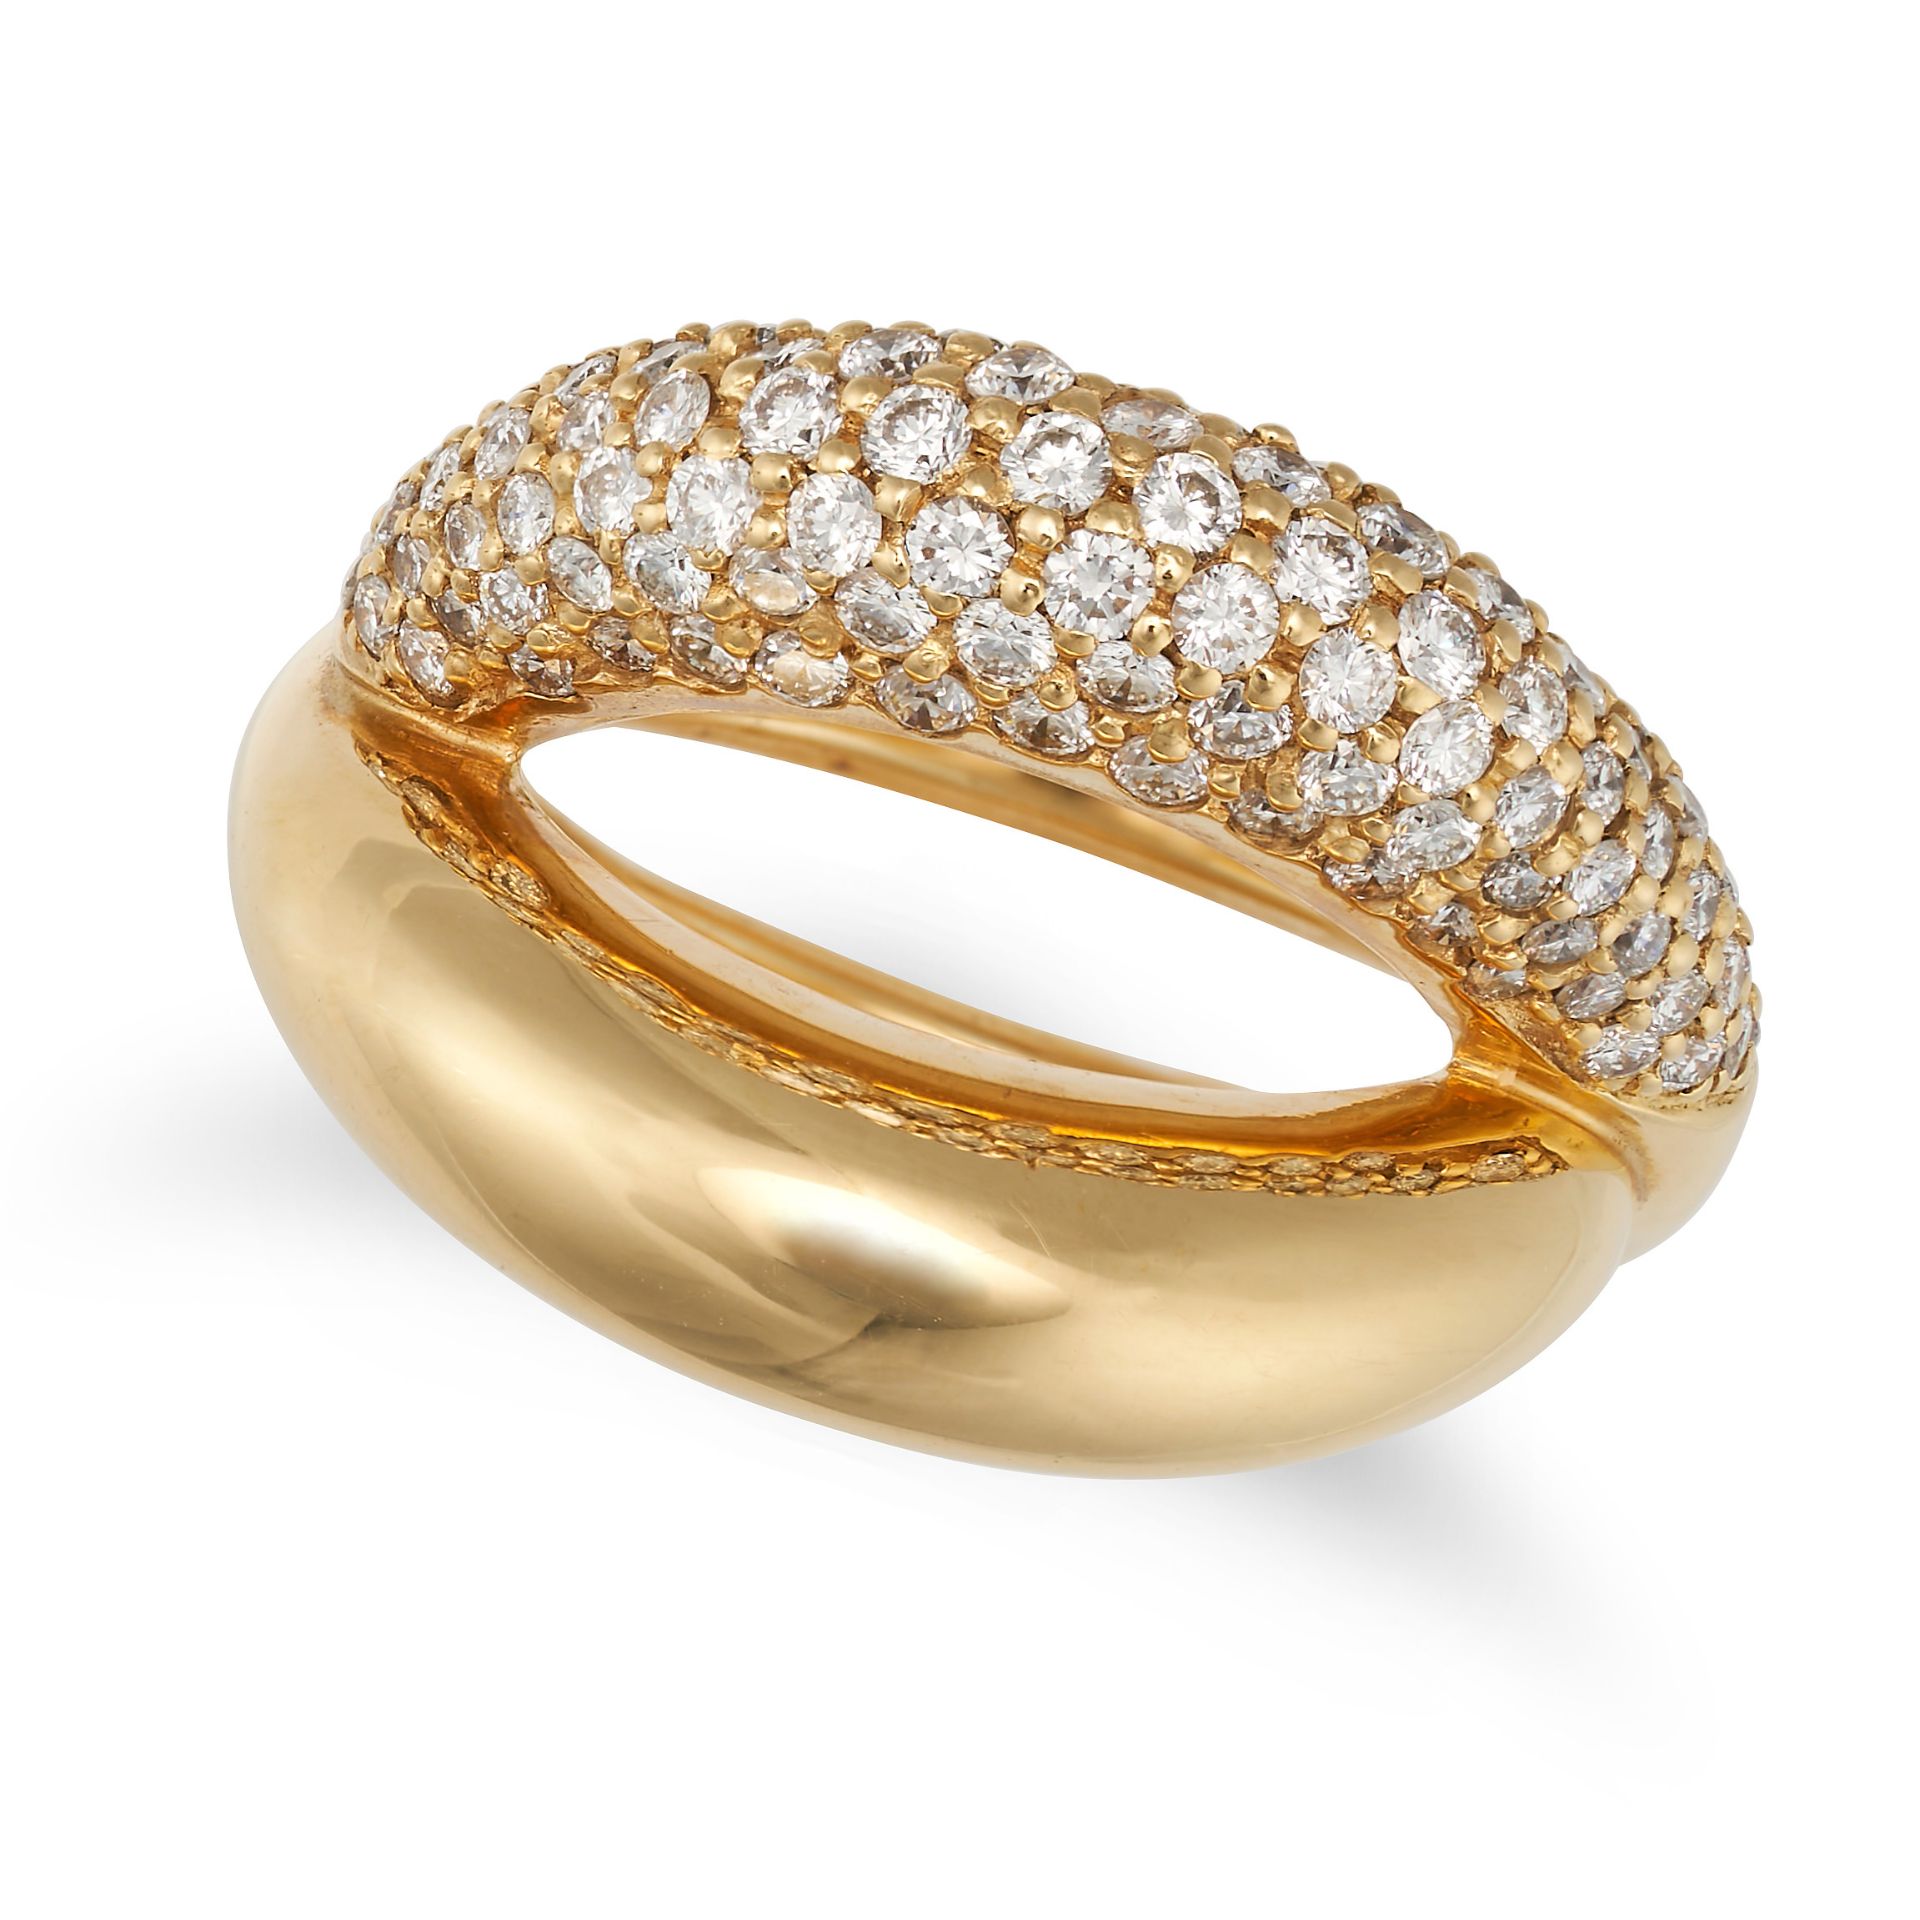 MAUBOUSSIN, A DIAMOND TWINS RING in 18ct yellow gold, comprising two bands, one pave set with rou...